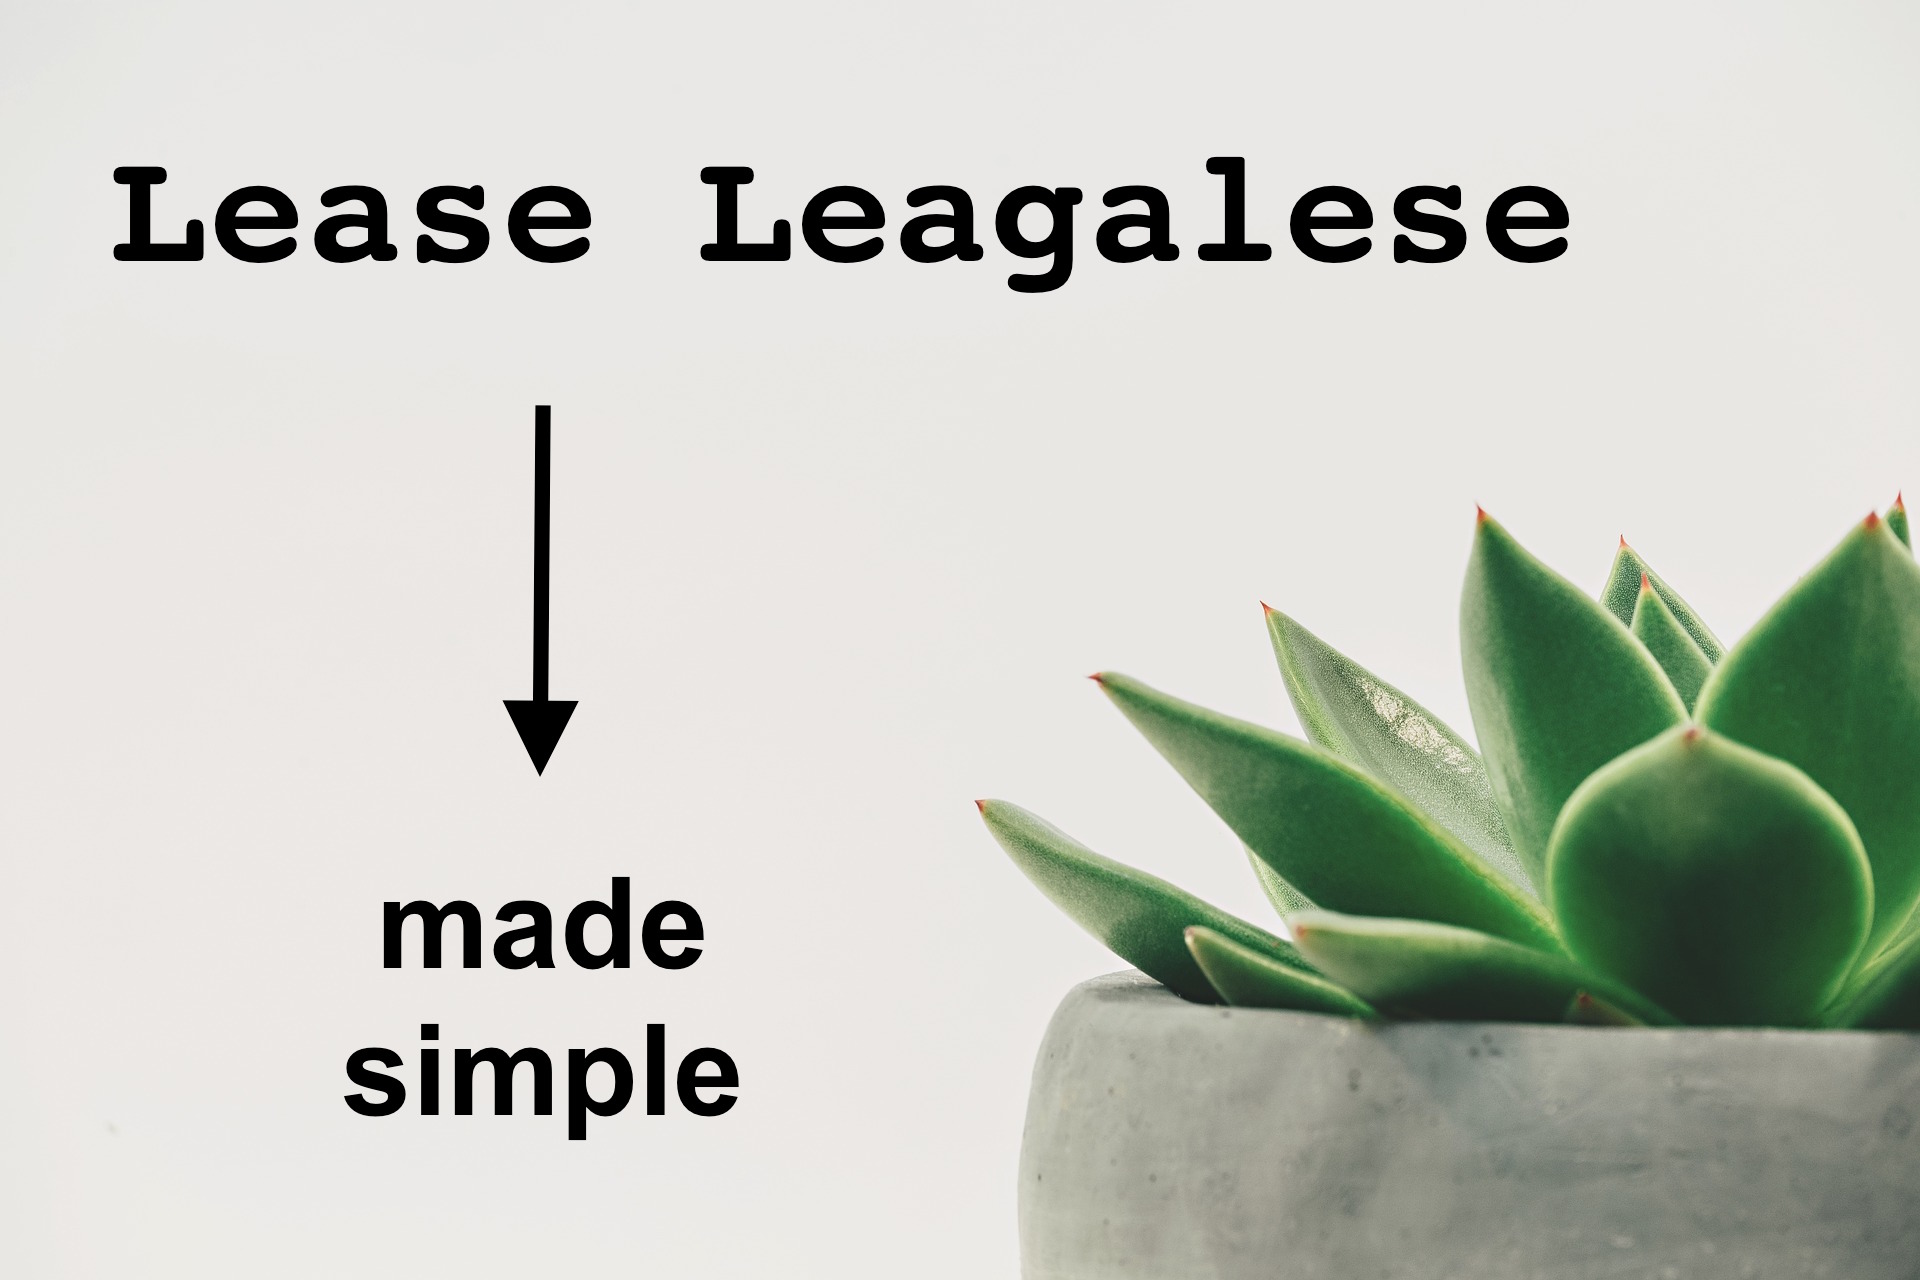 Residential Lease Language Made Simple